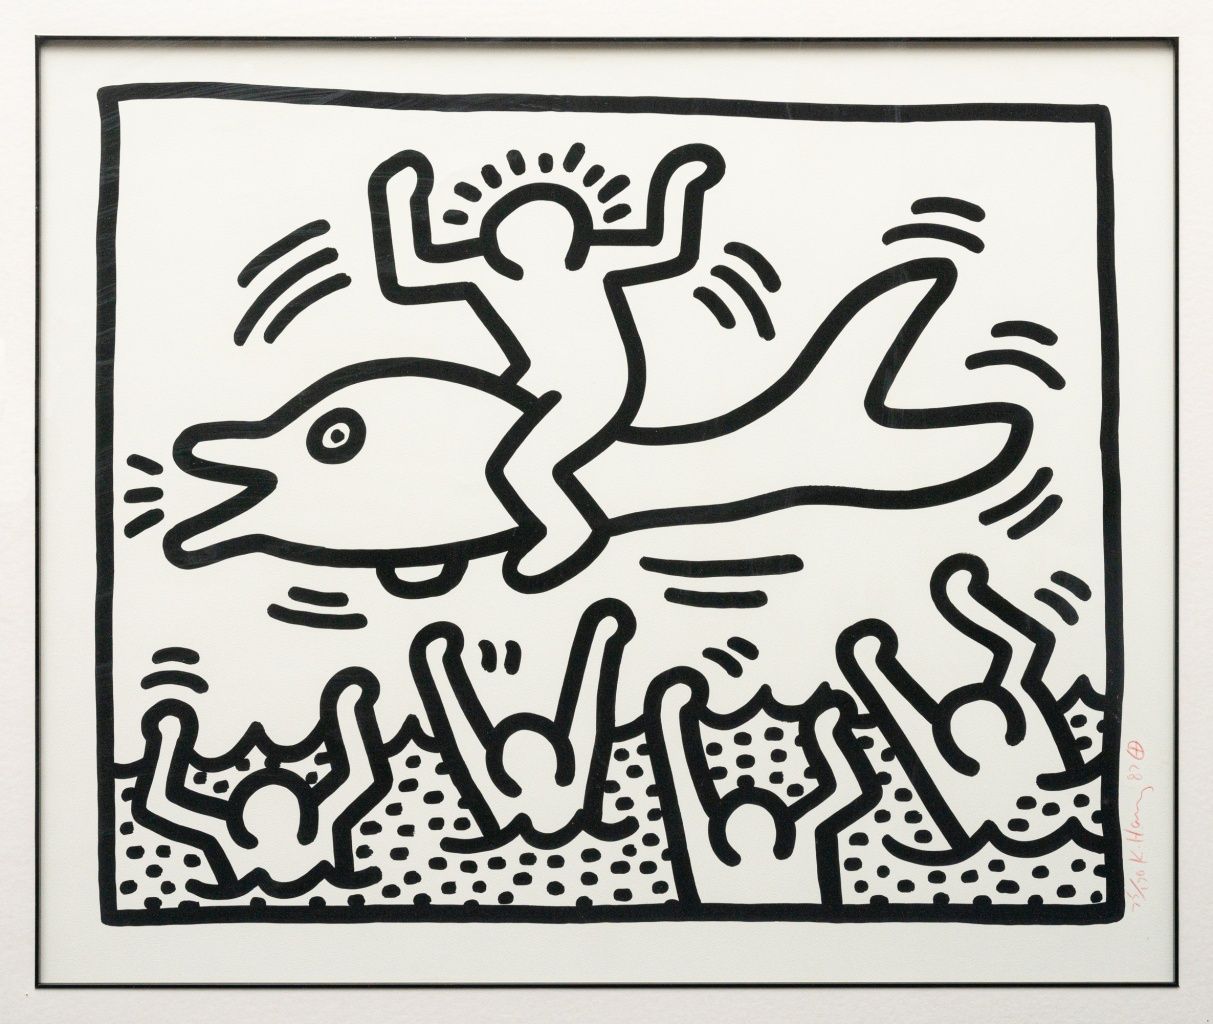 KEITH HARING (1958 - 1990) Keith HARING (1958 - 1990)
Ohne Titel, 1987 (Man on D&hellip;